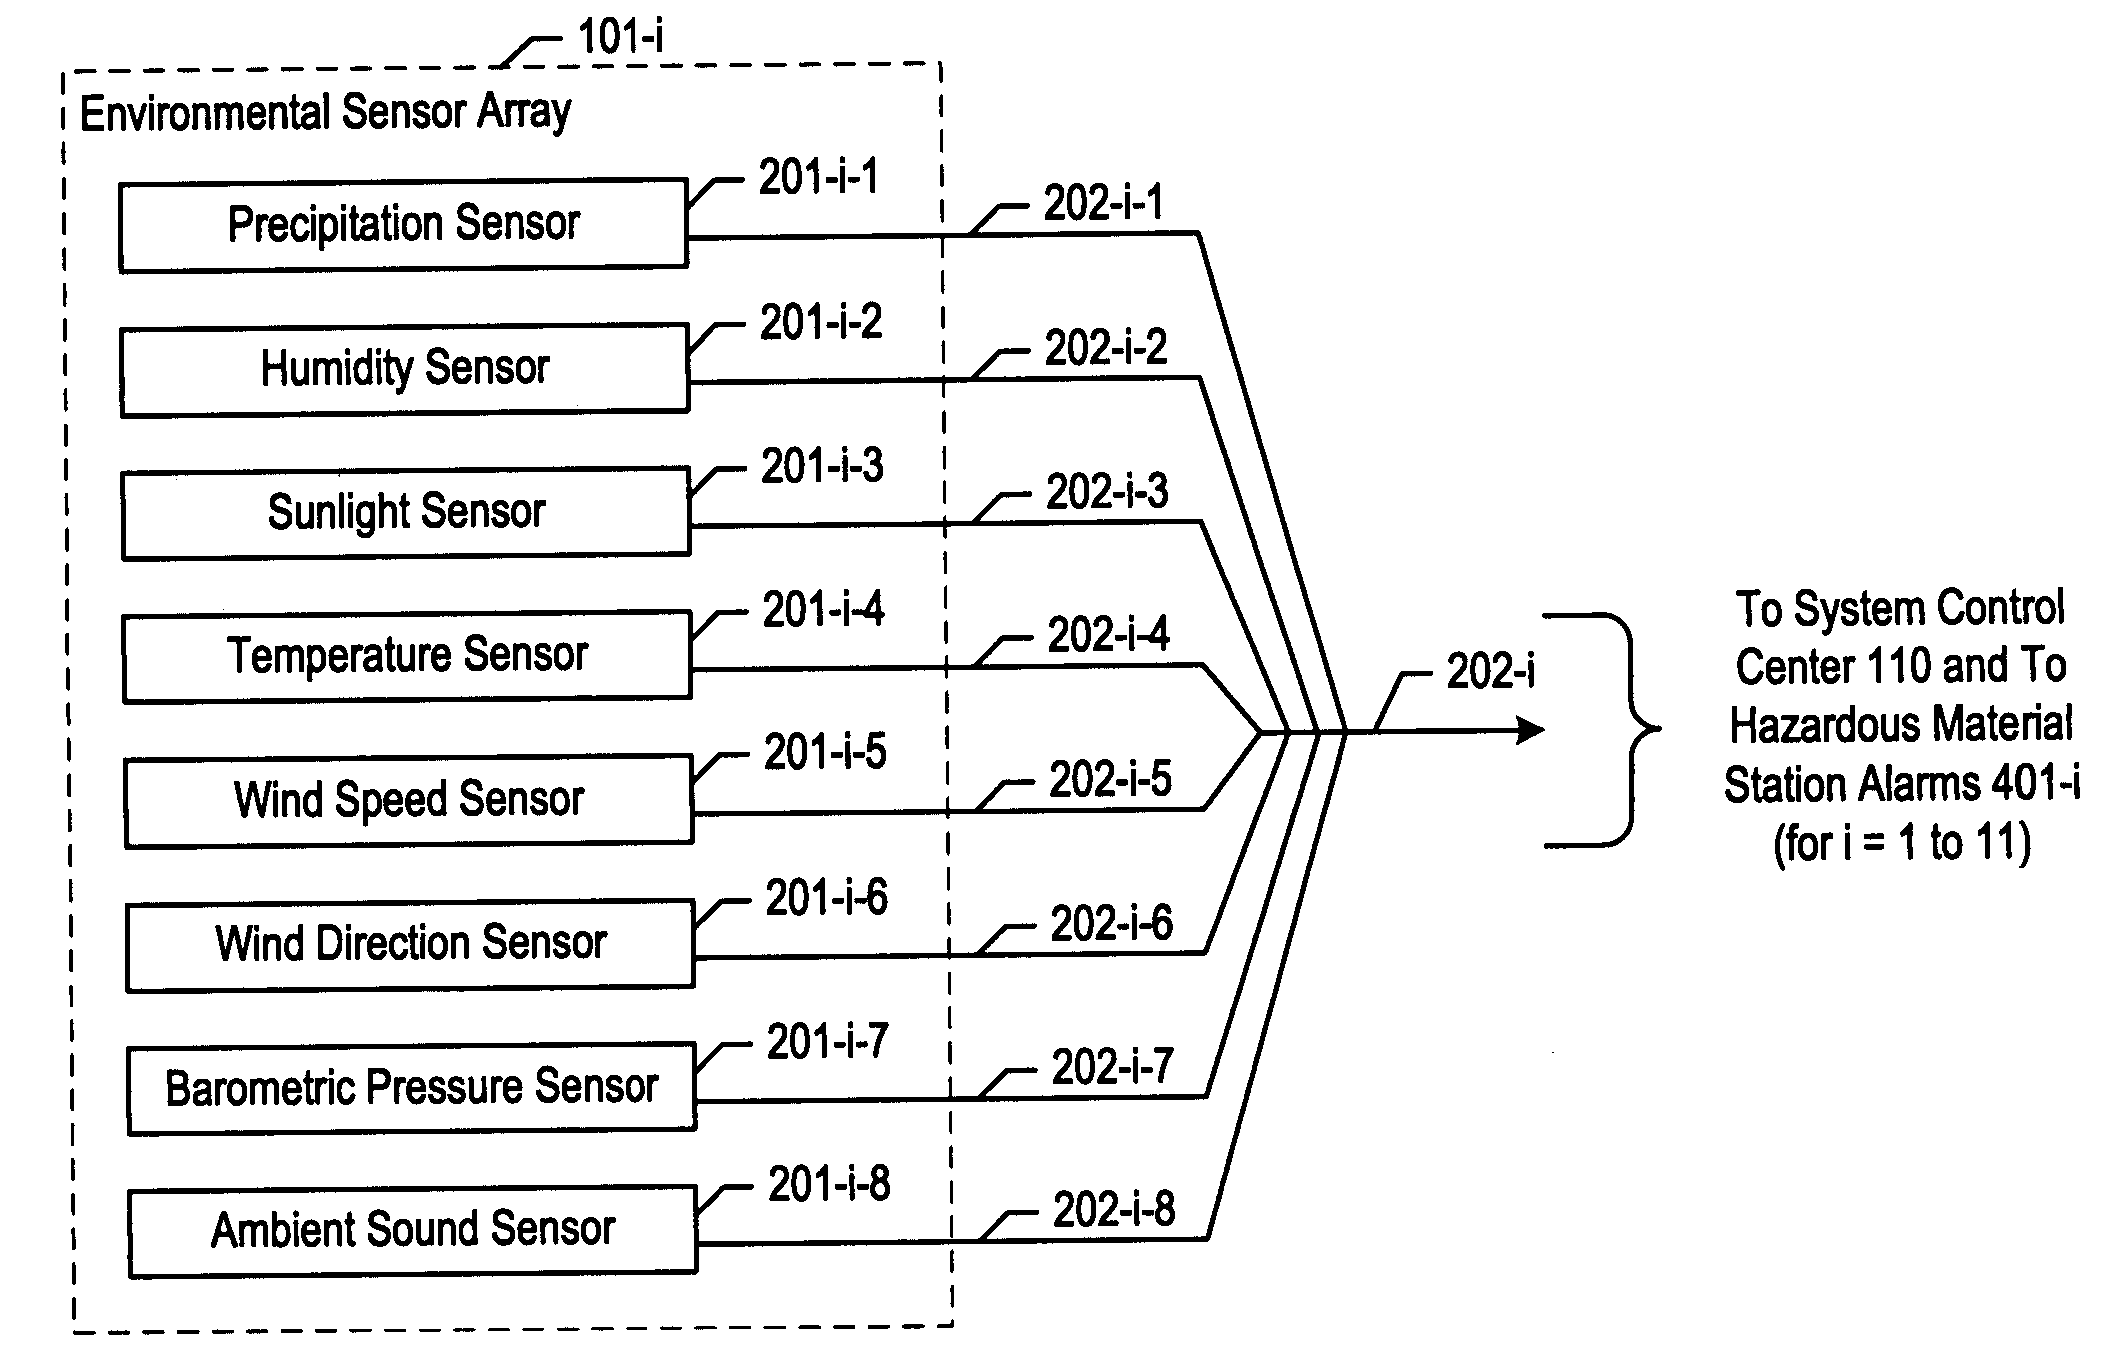 Chemical, biological, radiological, and nuclear weapon detection system with alarm thresholds based on environmental factors